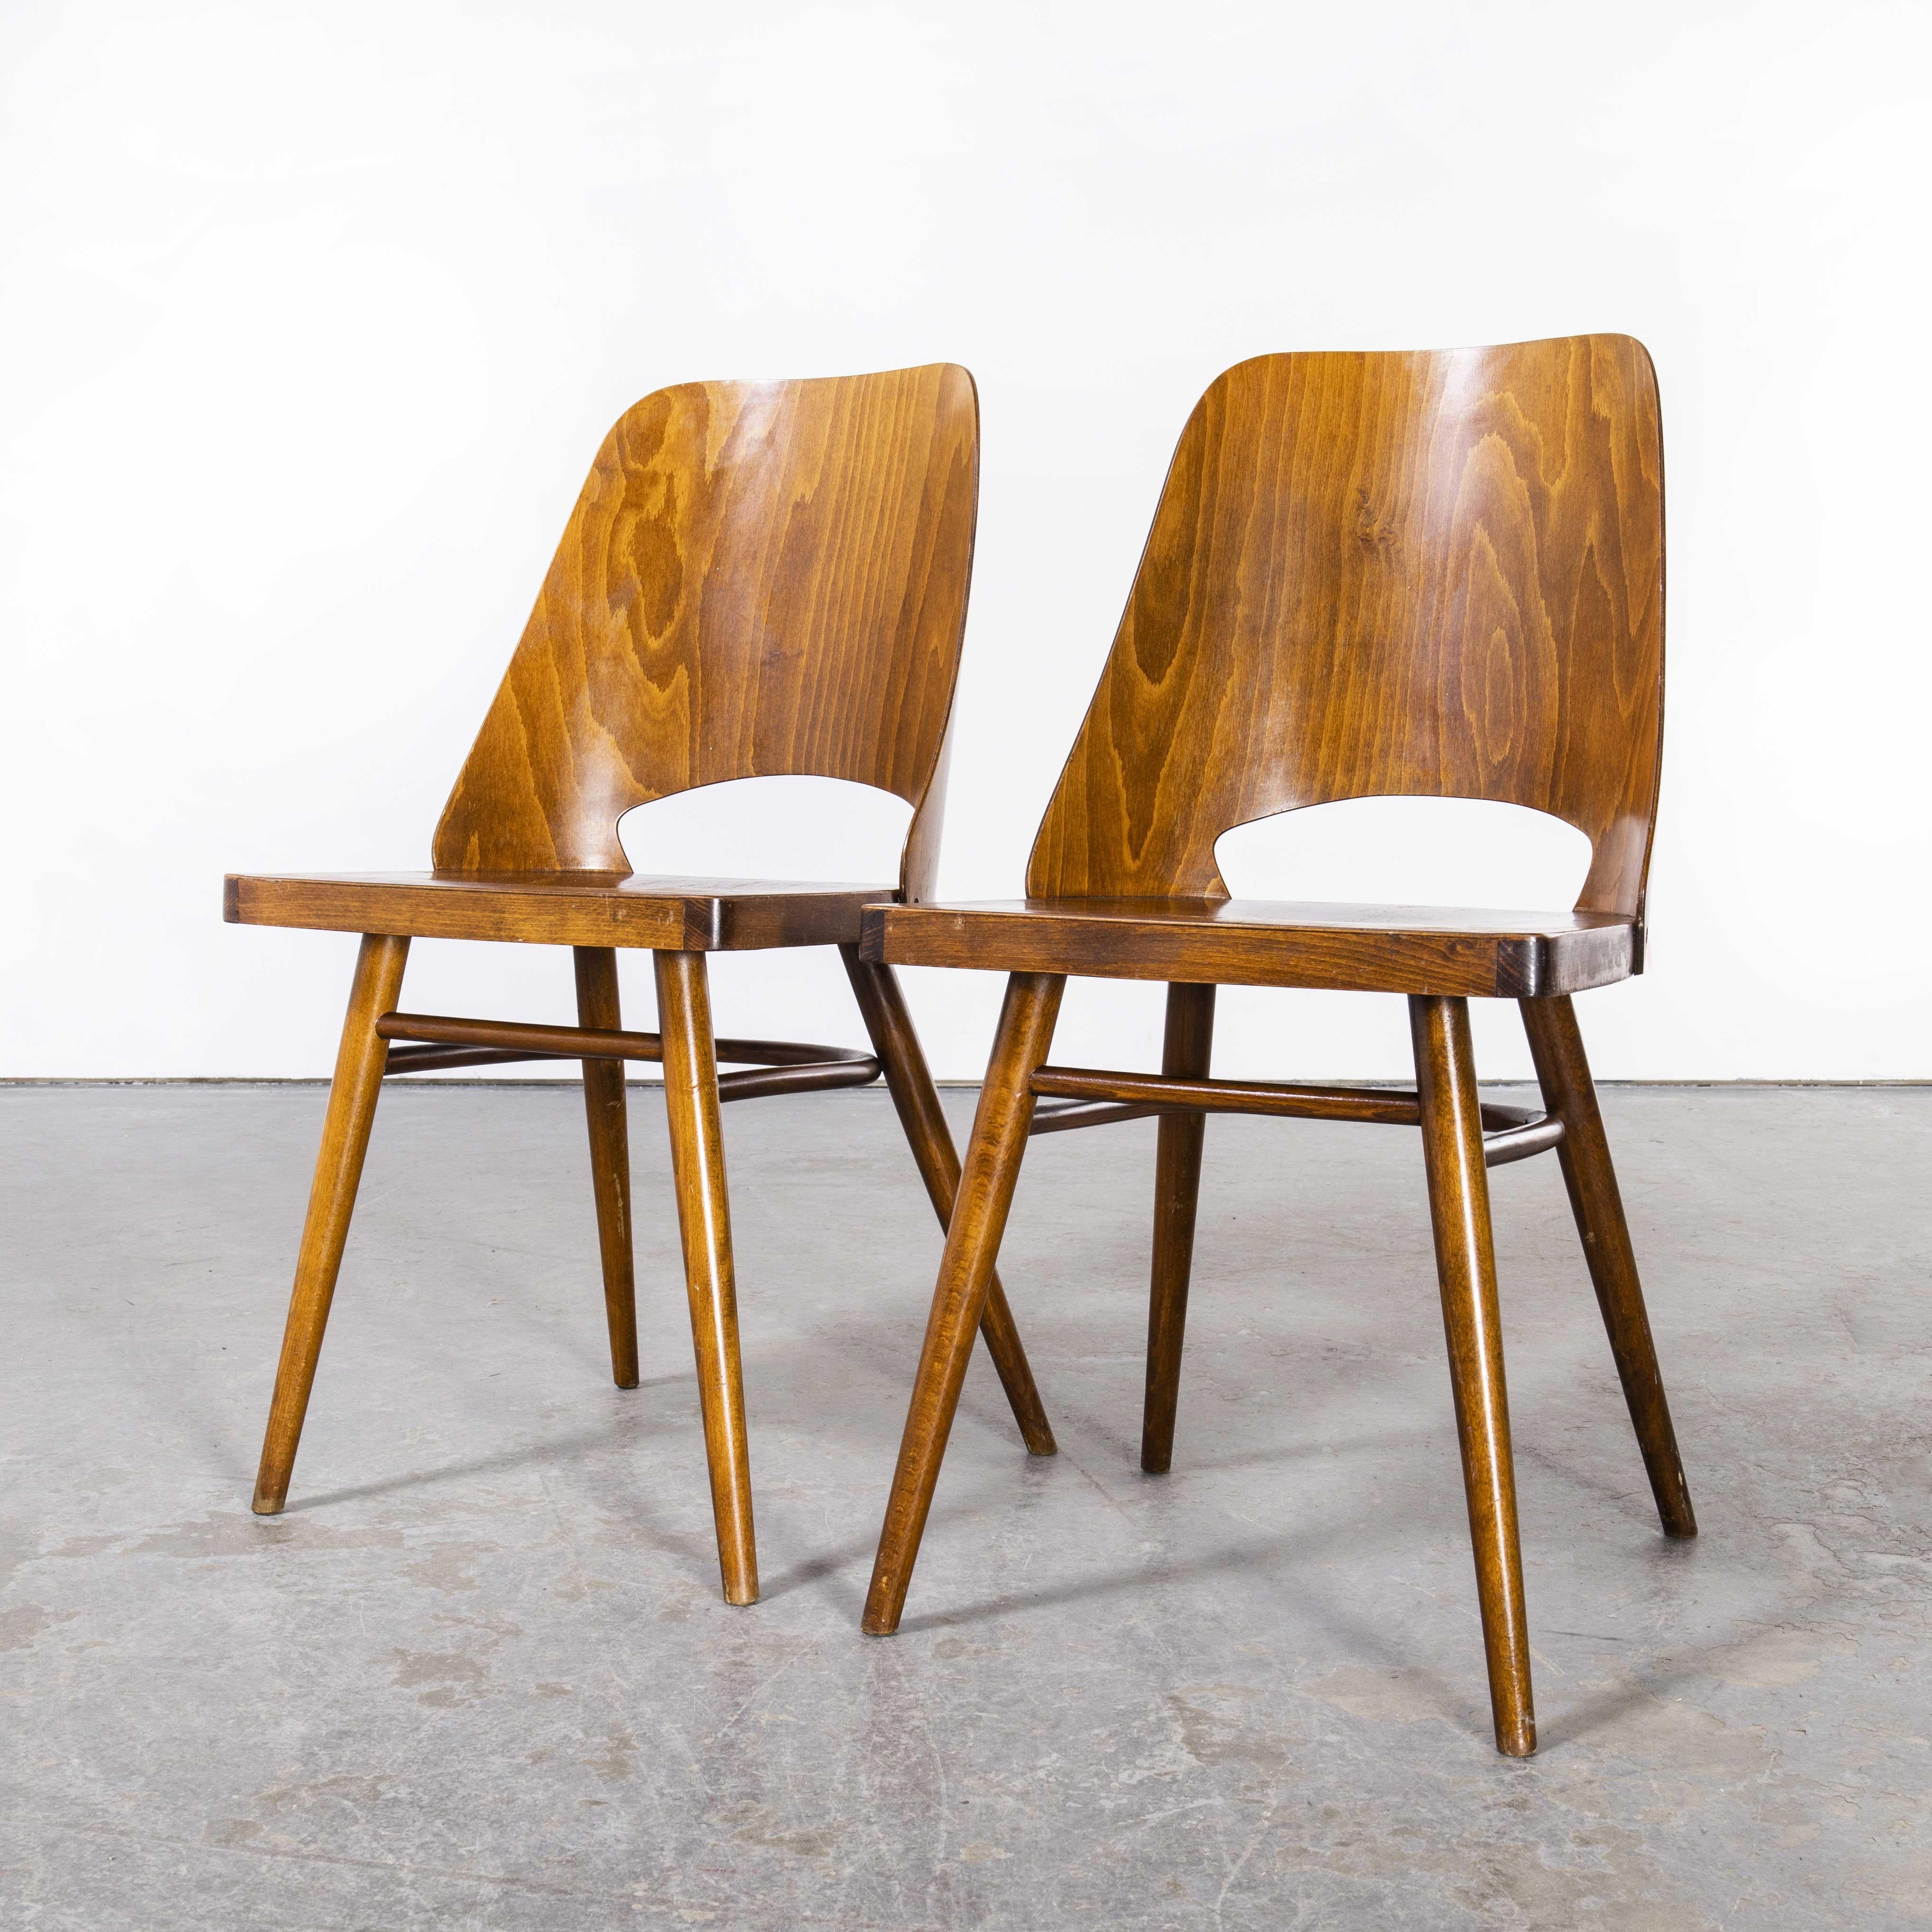 1950's Honey Beech Dining Chairs by Radomir Hoffman, Pair For Sale 1